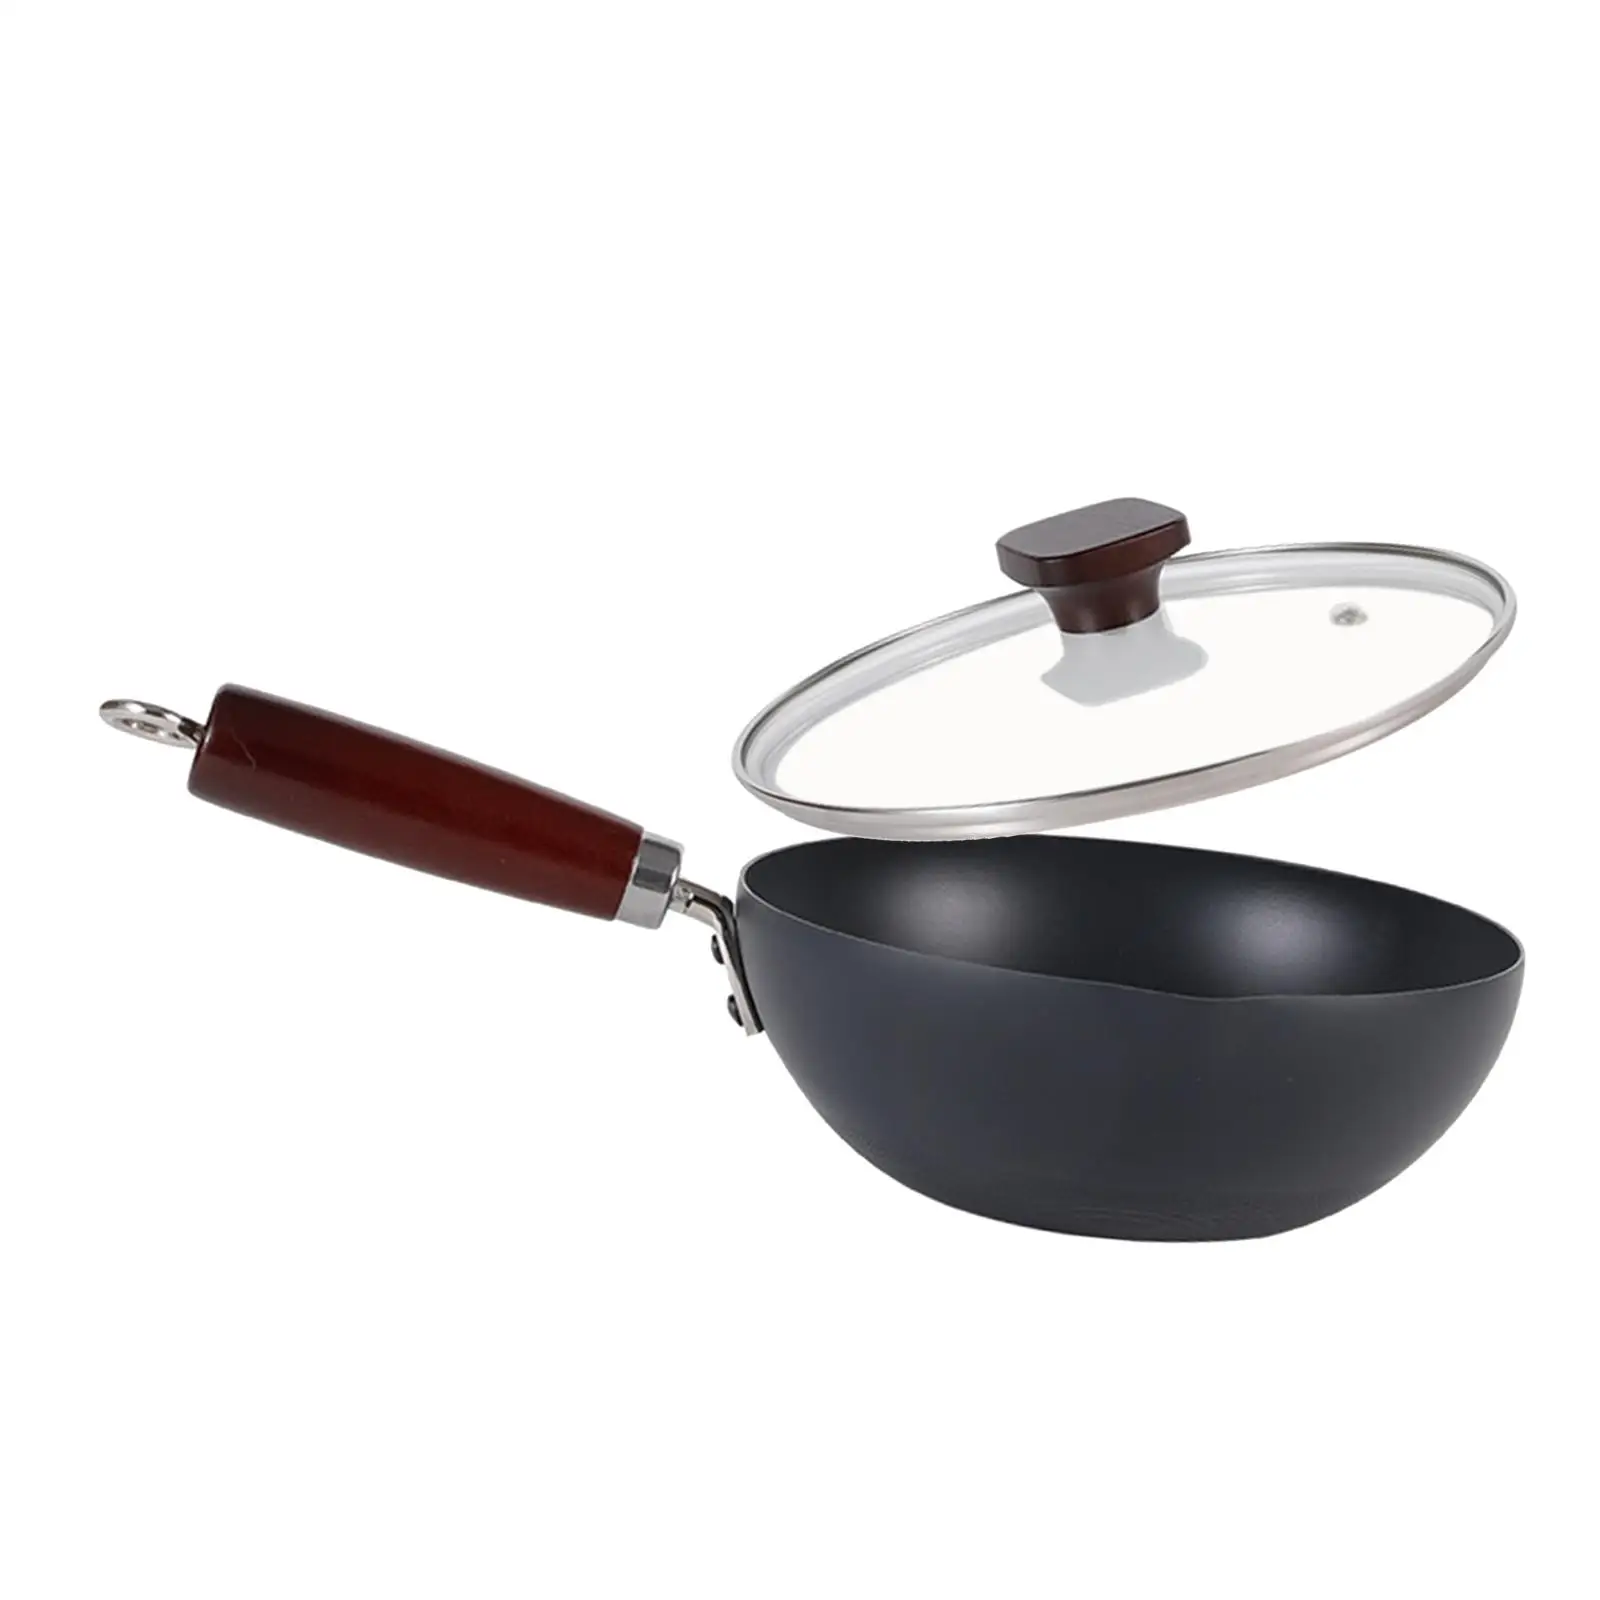 Wok Pan with Lid Household Homeuse Cooking Wok with Lid for Induction, Gas